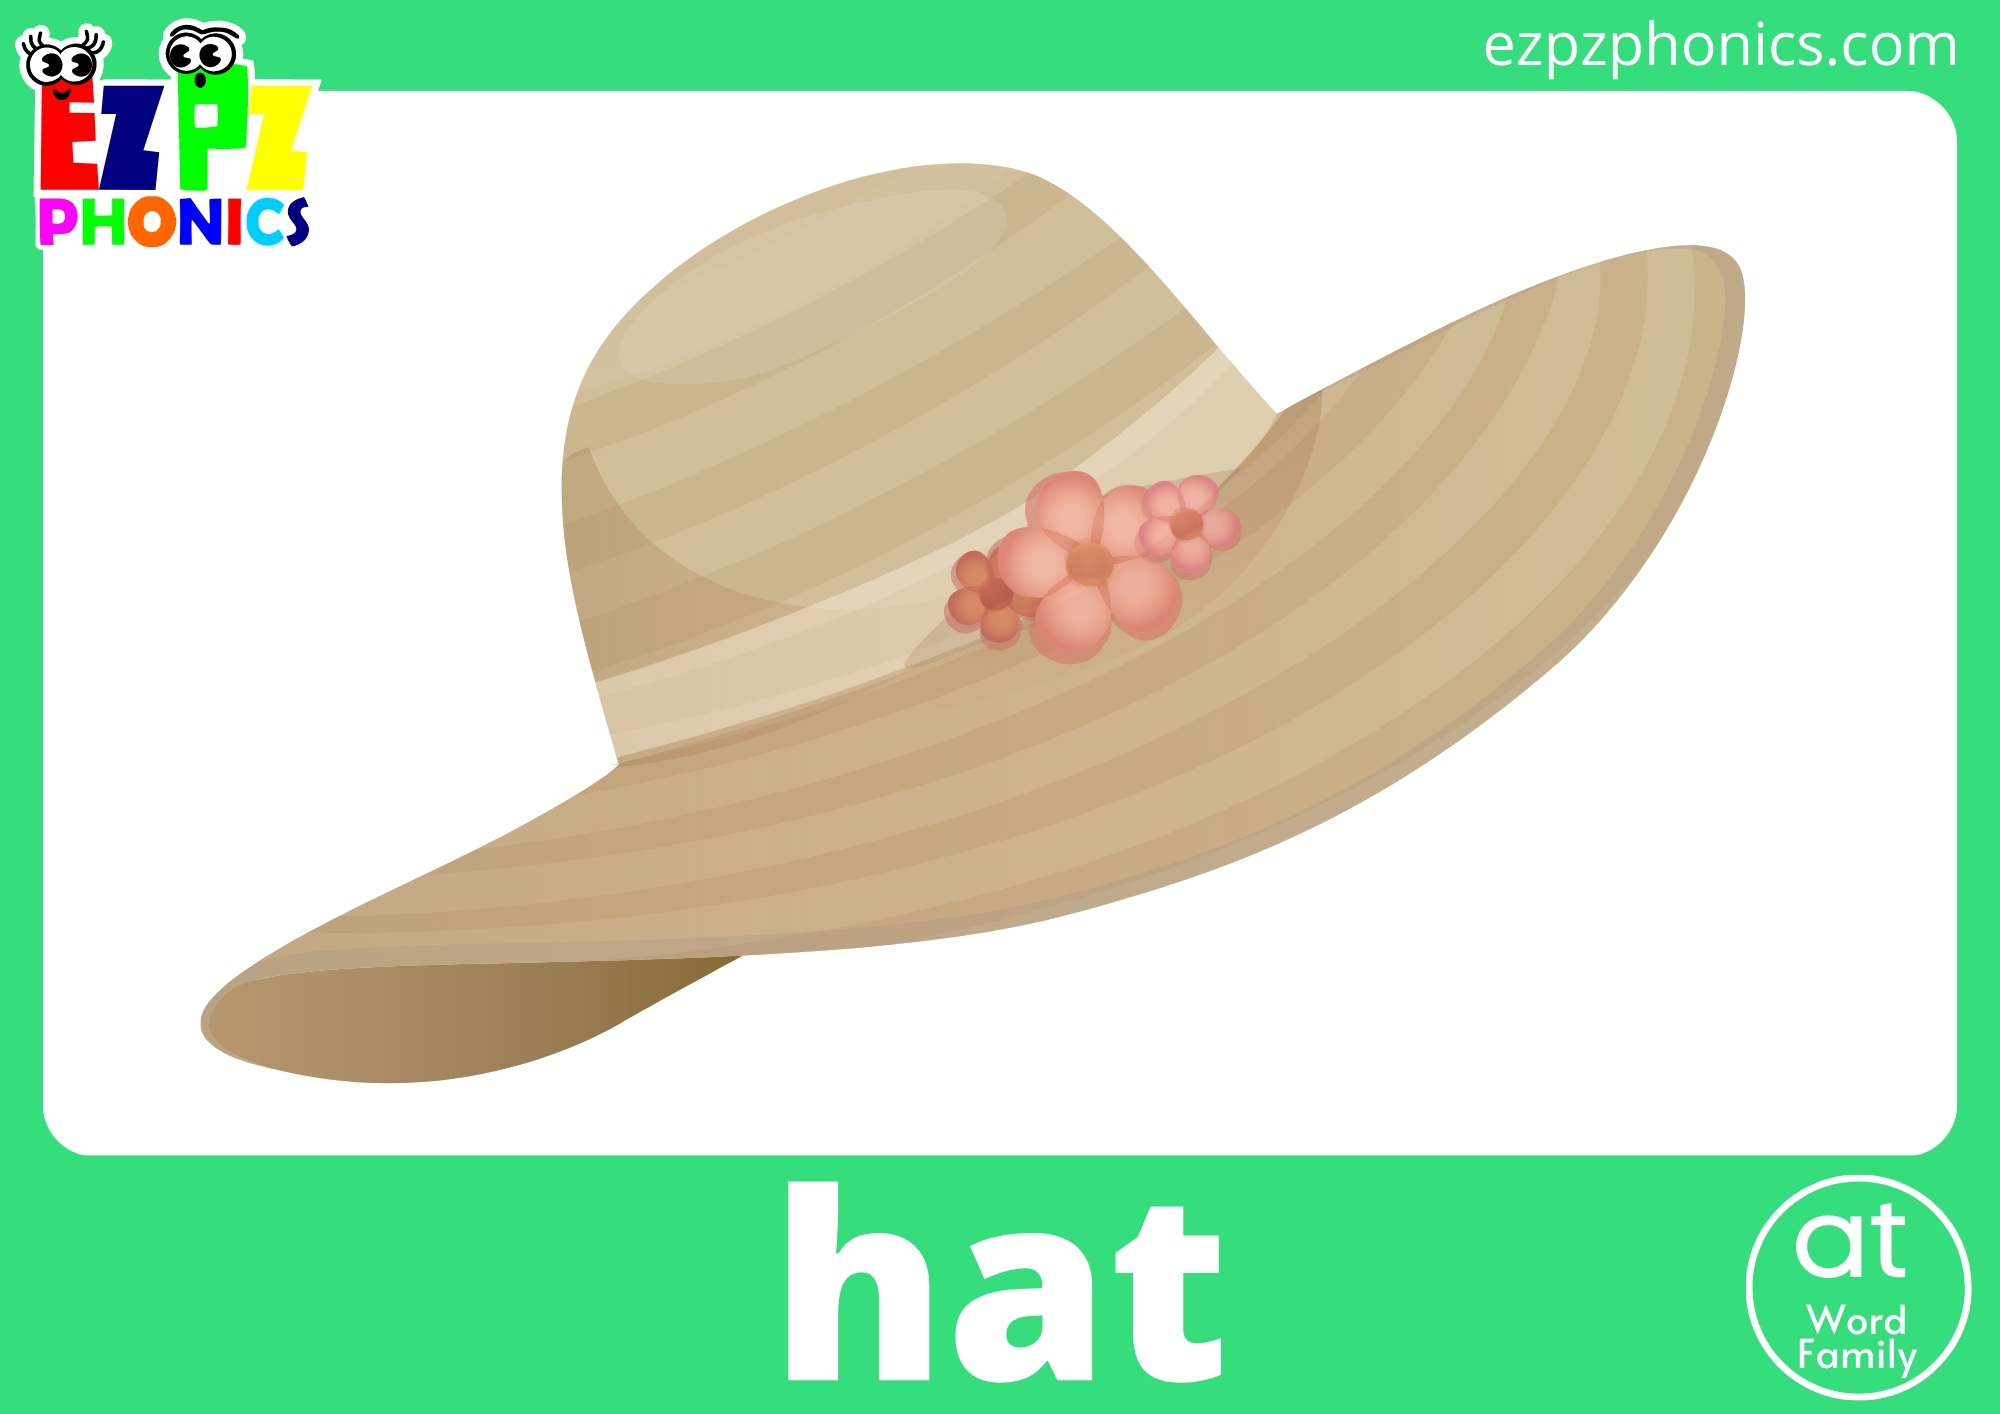 at Word Family Flashcards - ezpzphonics.com